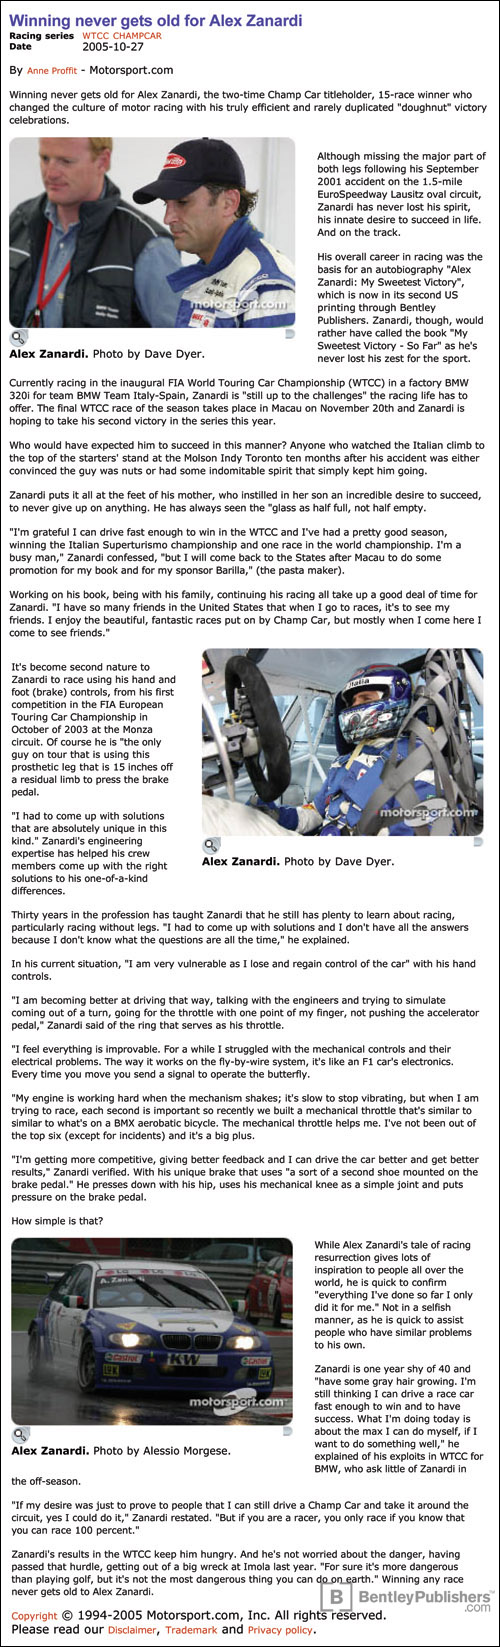 Article about Alex Zanardi from Motorsport.com from October 27, 2005